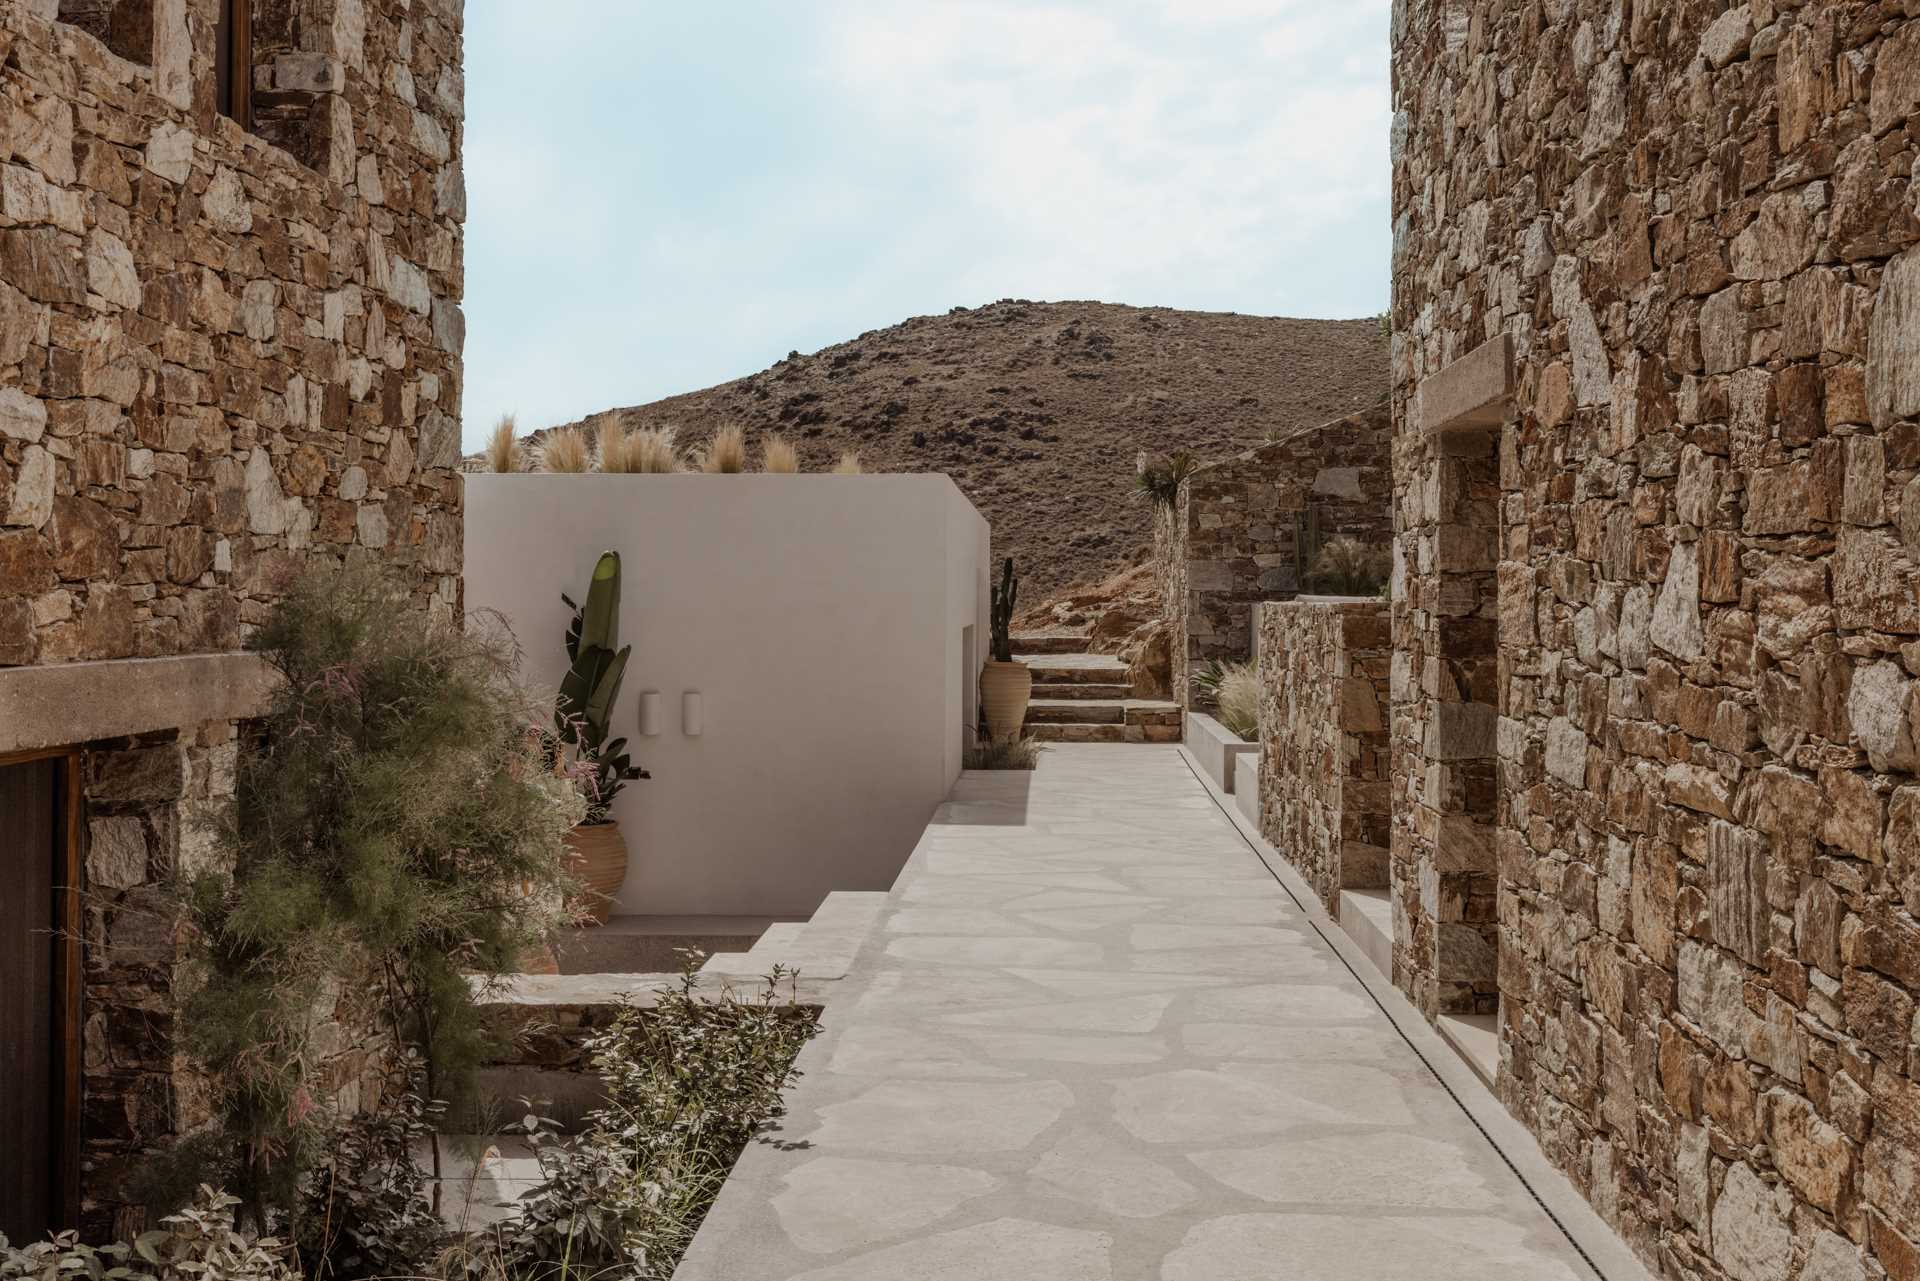 This modern home is arranged around a network of pathways that connect both enclosed spaces and the various terraces, gardens, and patios on site.